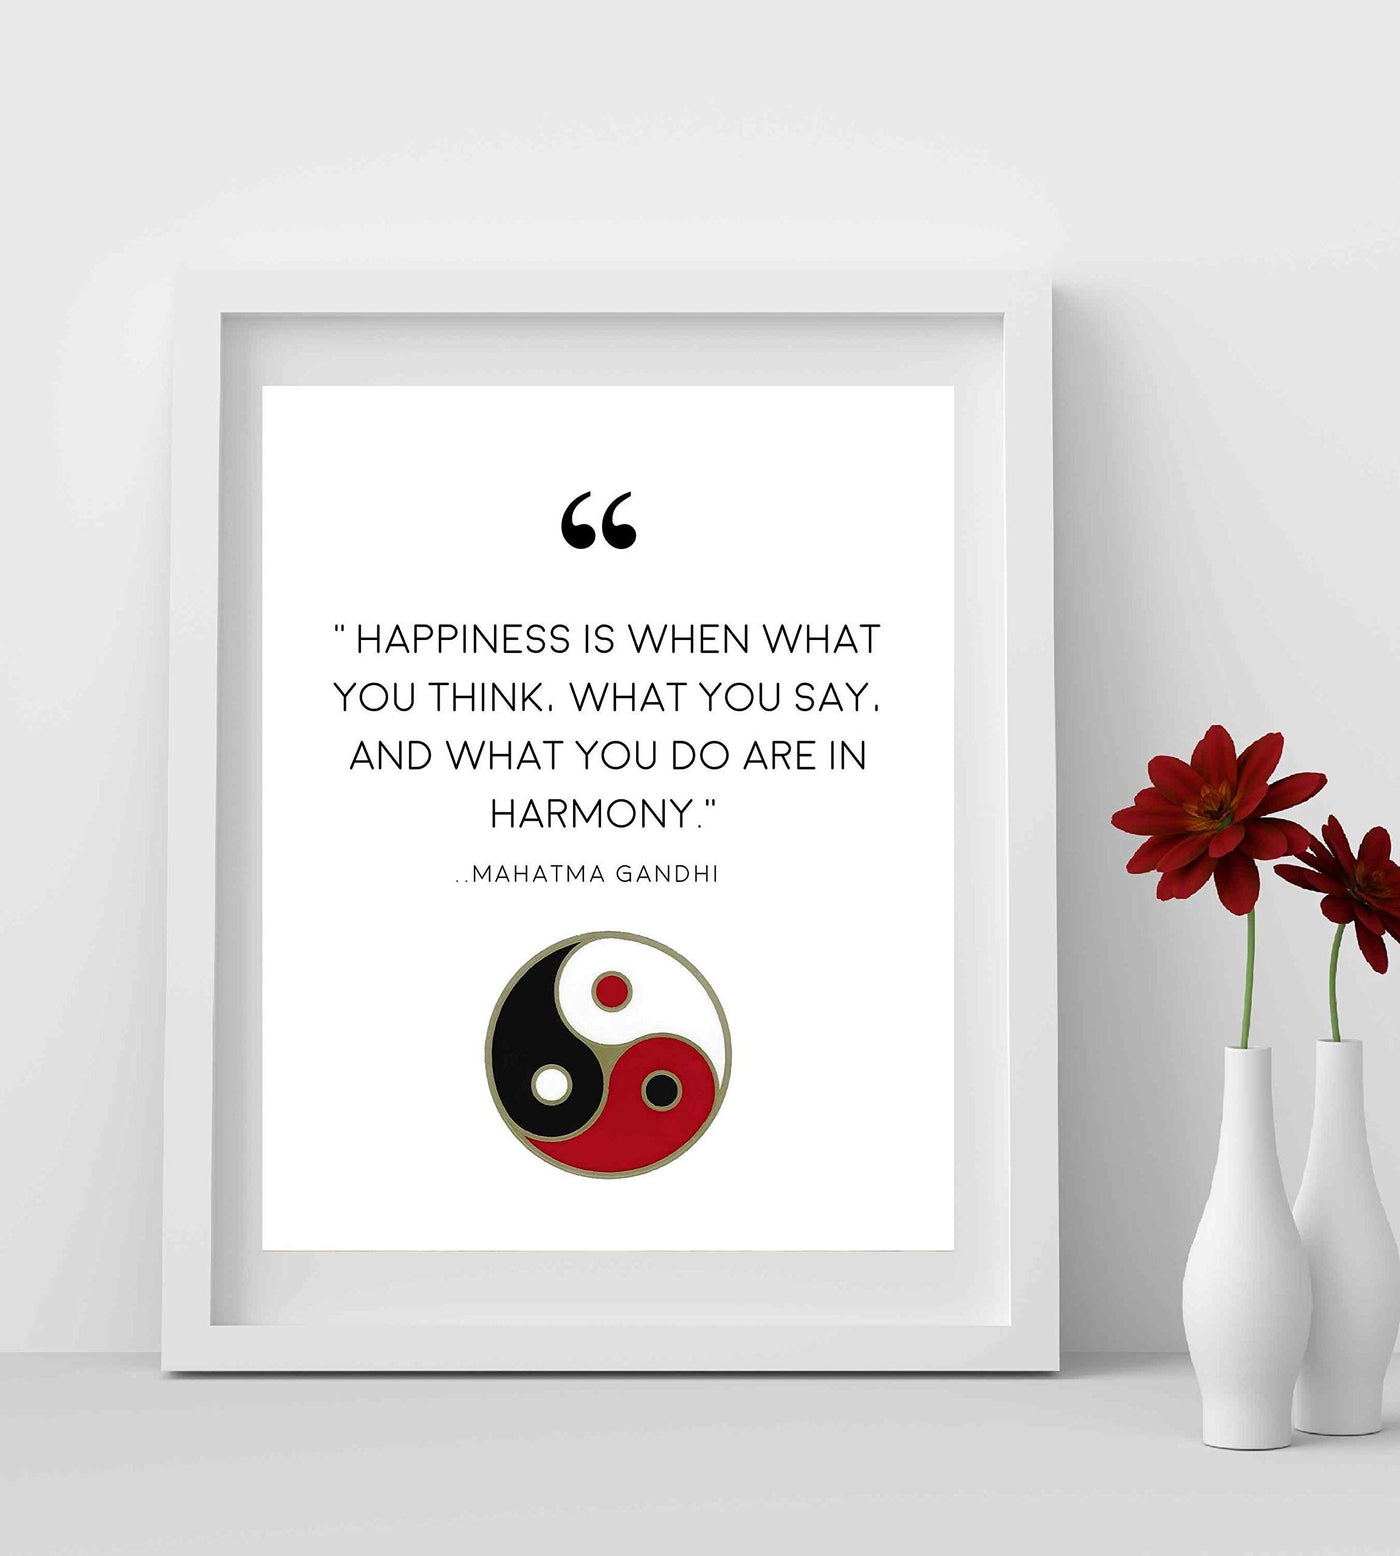 Mahatma Gandhi Quotes-"Happiness-When What You Think-Say-Do In Harmony"-8x10" Spiritual Wall Art Print-Ready to Frame. Modern Home-Studio-Office Decor. Perfect Gift for Motivation, Zen & Inspiration!